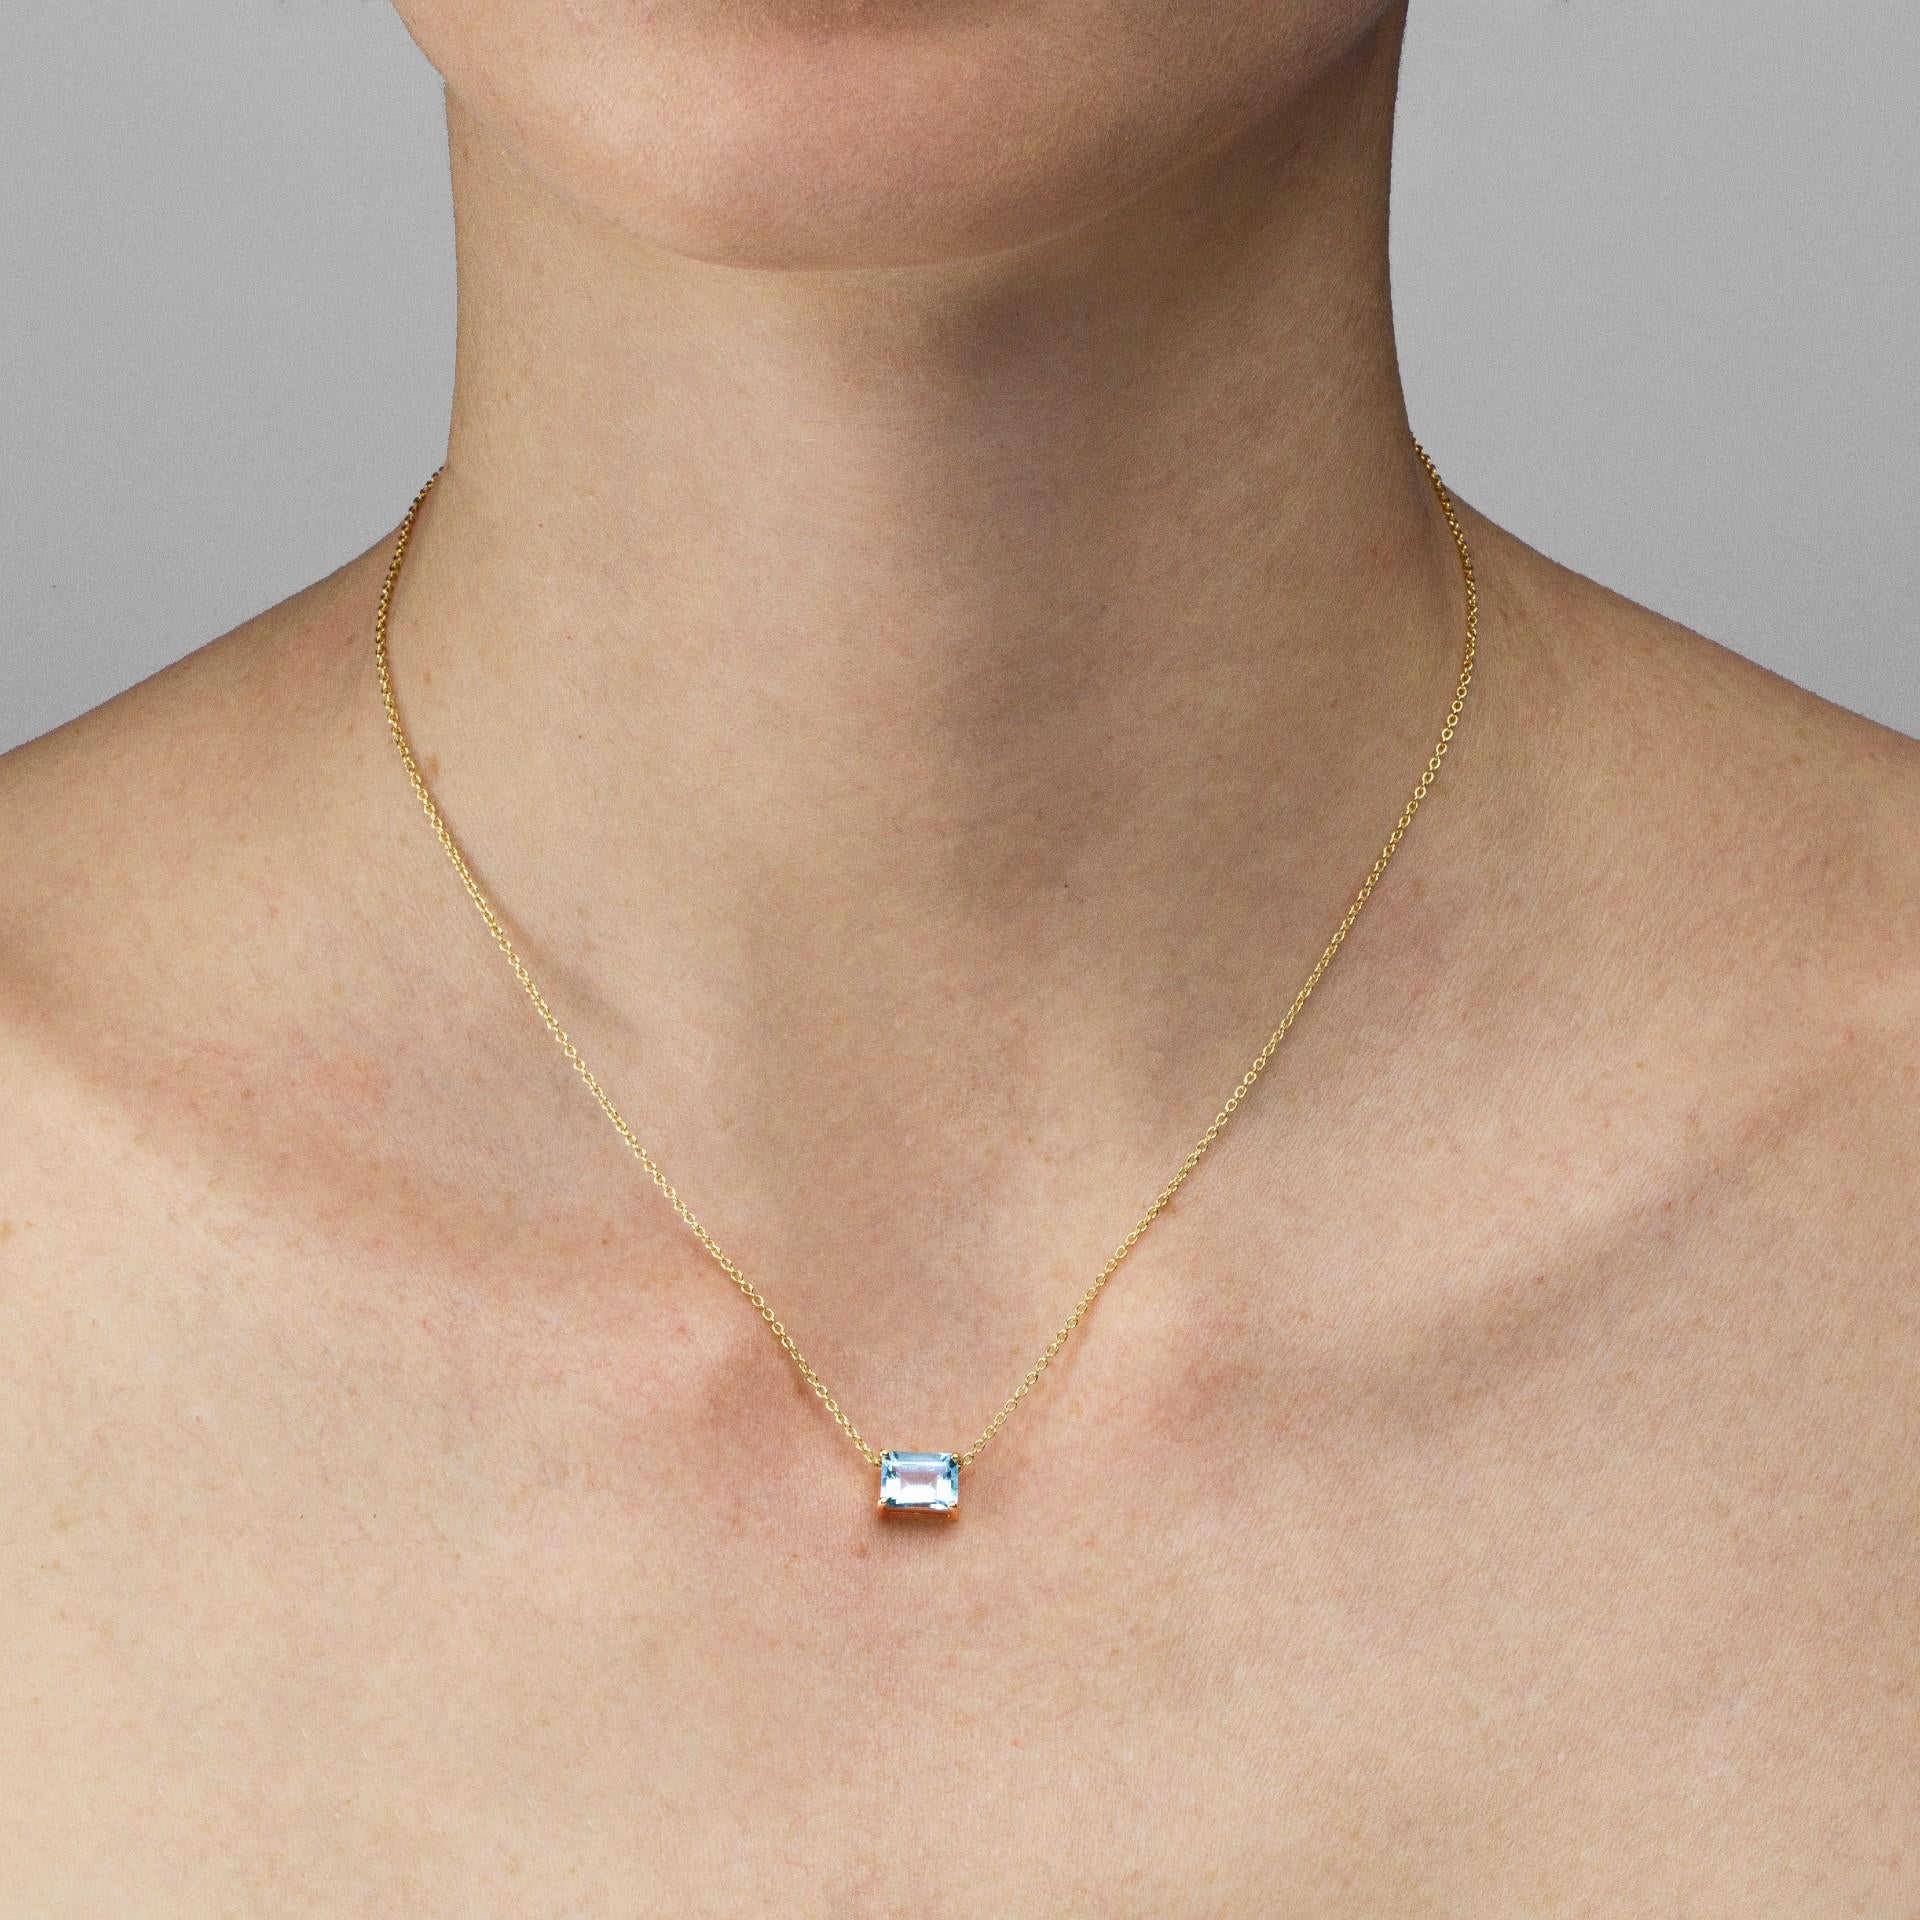 Alex Jona design collection, hand crafted in Italy, 18 Karat yellow gold chain necklace featuring an emerald cut aquamarine weighing 1.46 carats.
Dimensions: L x 18.11 in / L x 45cm.

Alex Jona jewels stand out, not only for their special design and